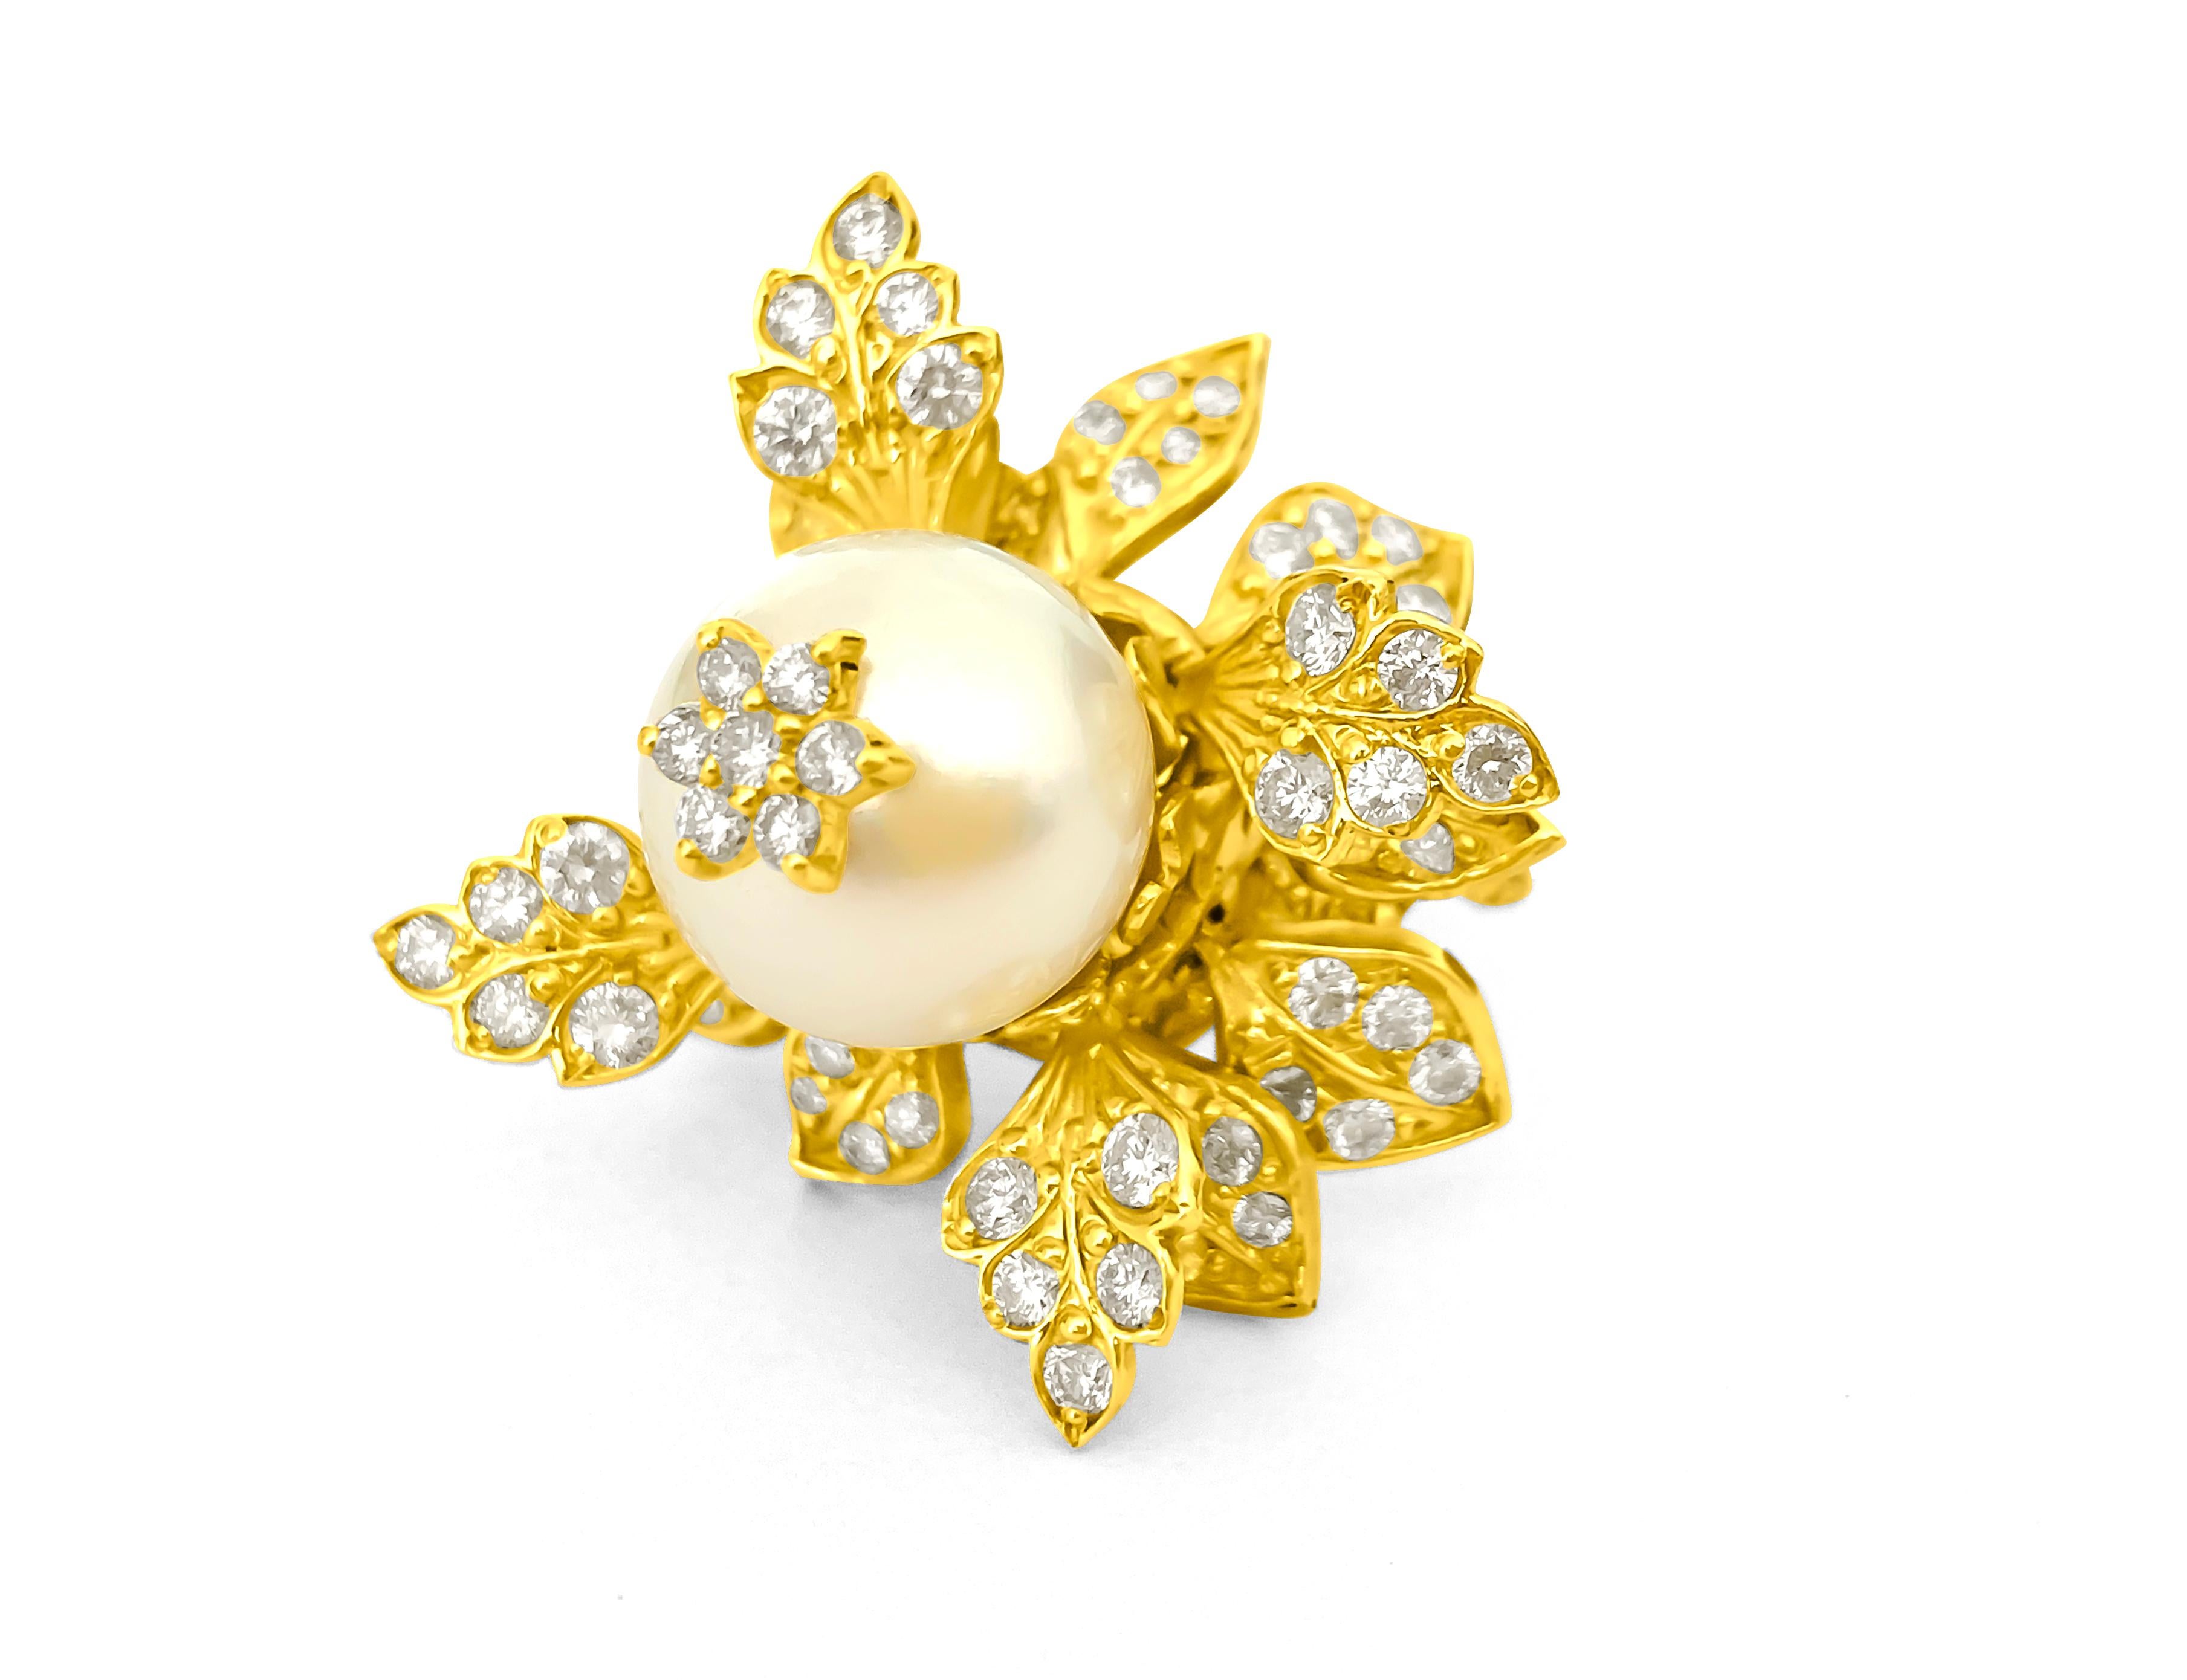 Metal: 18k yellow gold. 

Center stone: 20 carat Natural South Sea Pearl. Round shape. 
Excellent color and saturation. 

Diamonds: TCW of 4.50 carats. Color: F-G. Clarity: VS. Round brilliant cut diamonds. 100% natural earth mined and genuine